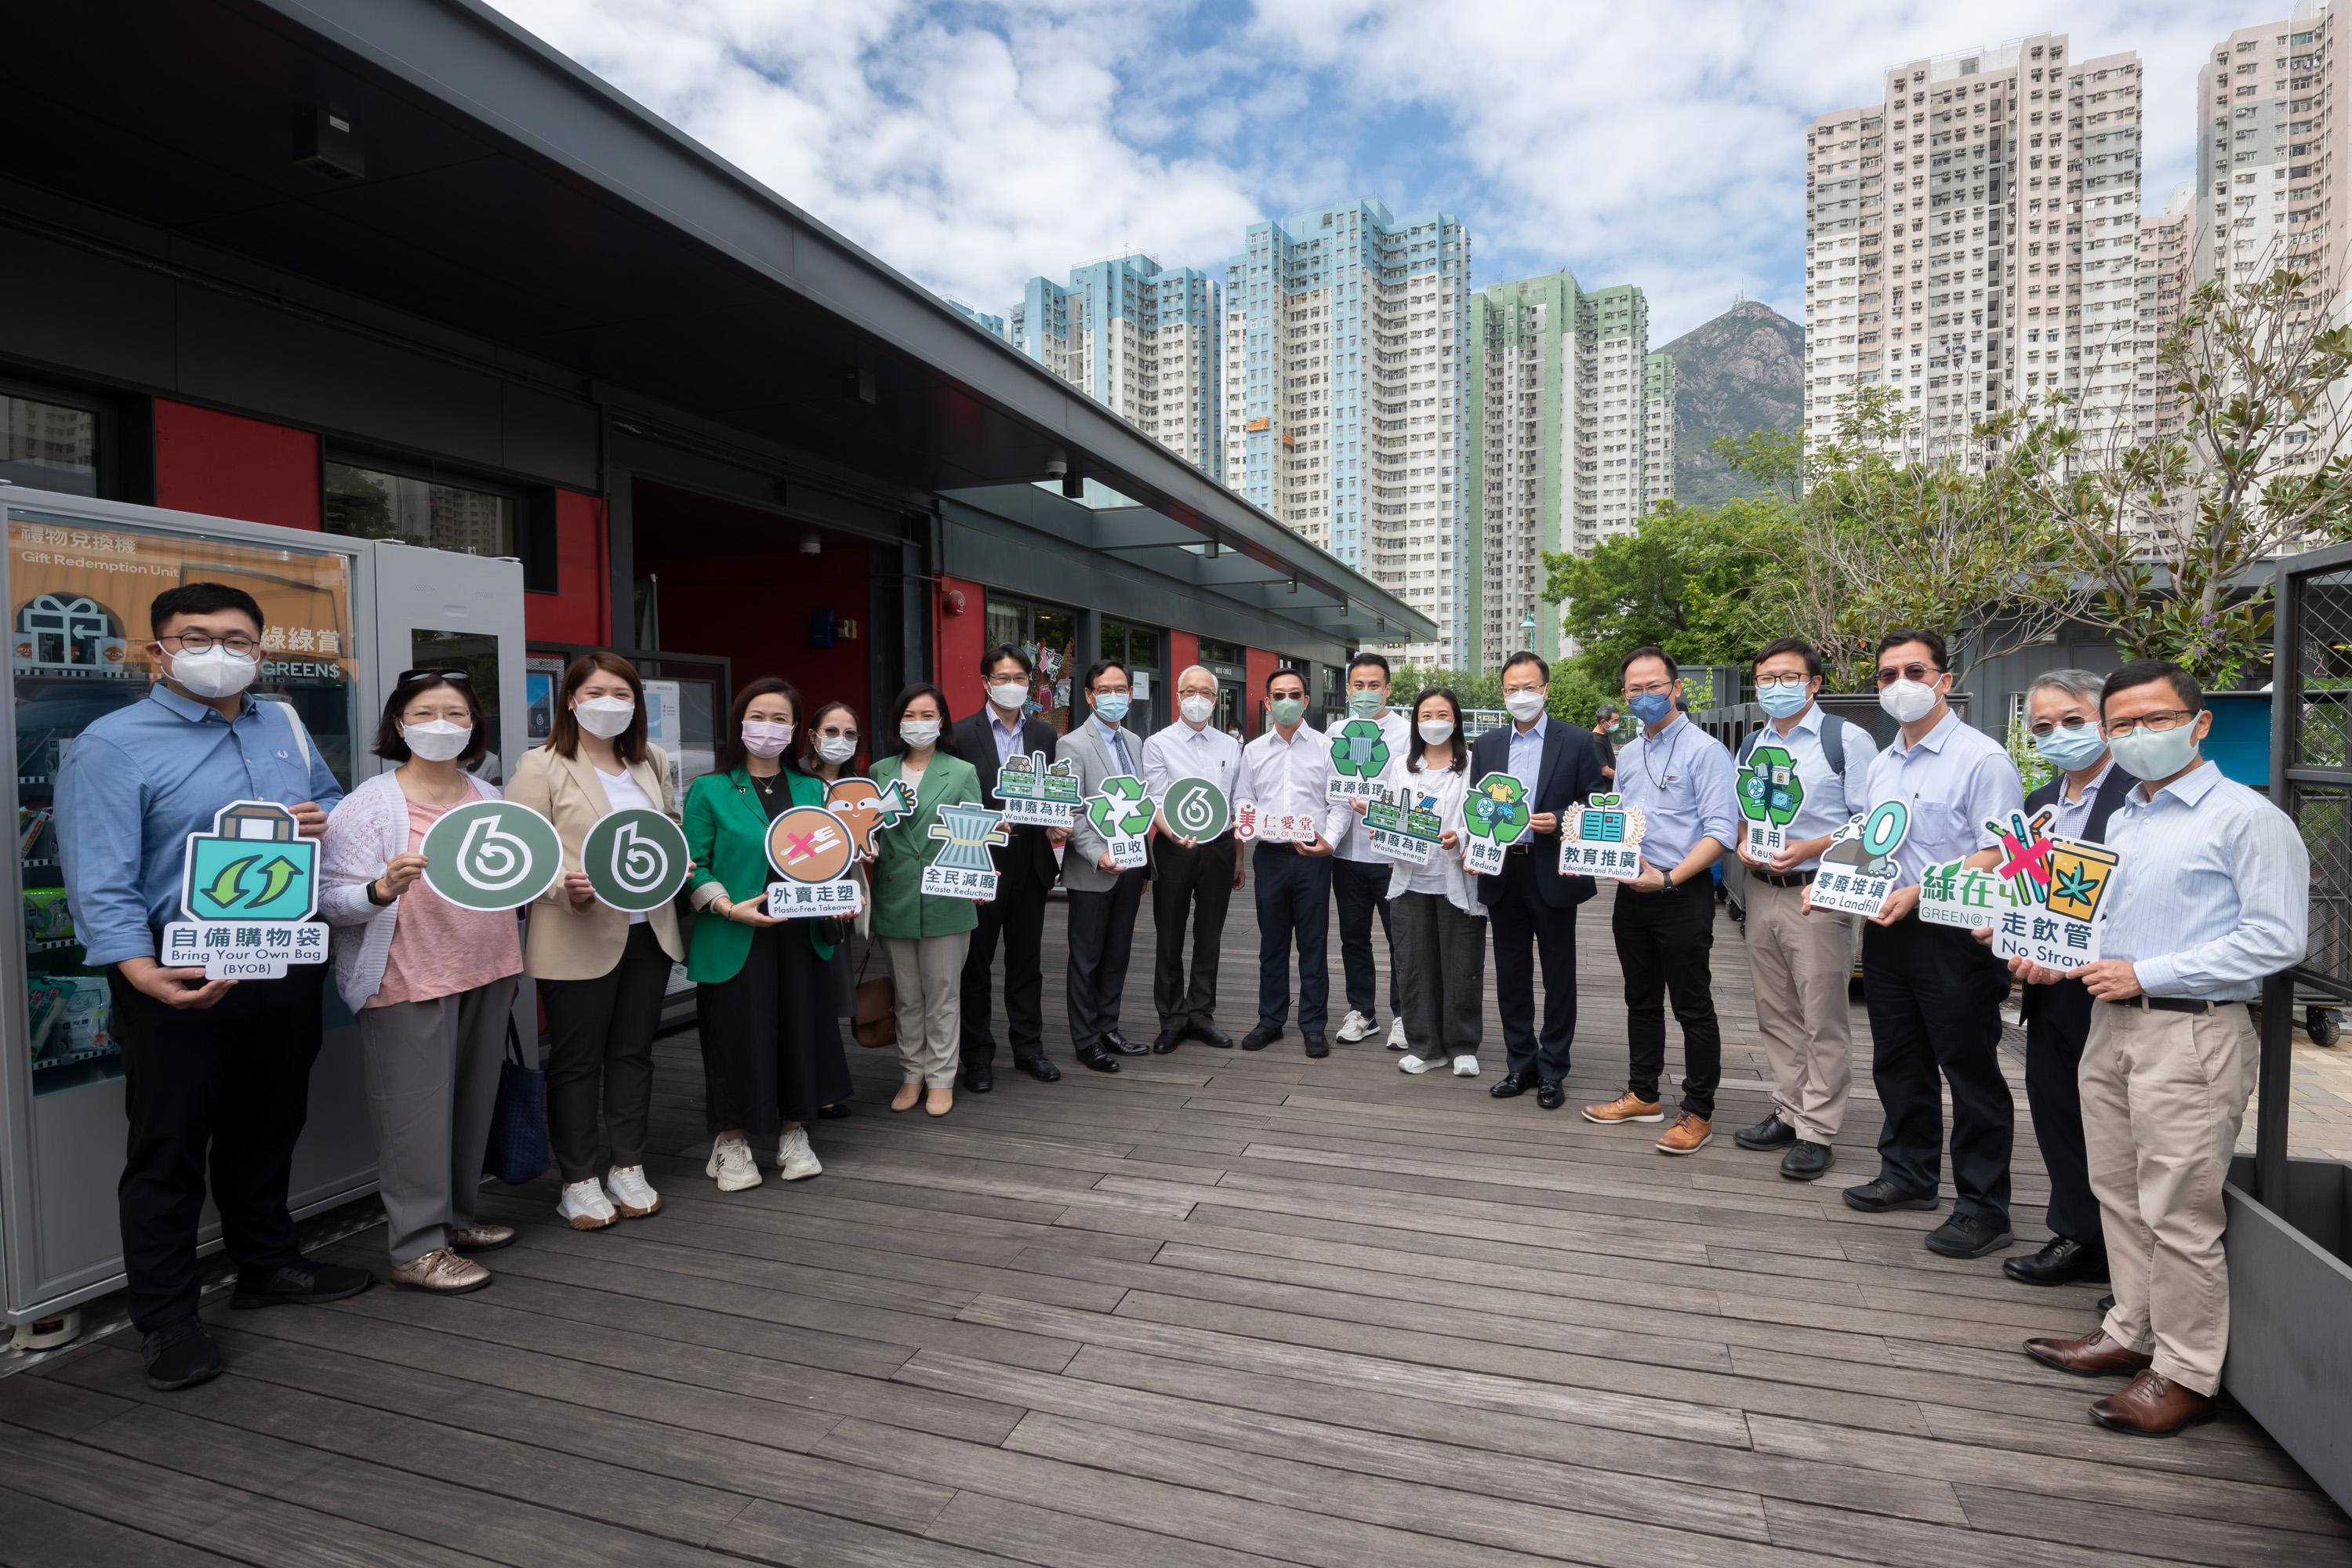 The Legislative Council (LegCo) Subcommittee to Study Policy Issues Relating to Municipal Solid Waste Charging, Recovery and Recycling visited waste treatment and resource recovery facilities in Tuen Mun today (October 13).  The LegCo Members are pictured with representatives of the Environment and Ecology Bureau and the Environmental Protection Department at the recycling station GREEN@TUEN MUN.